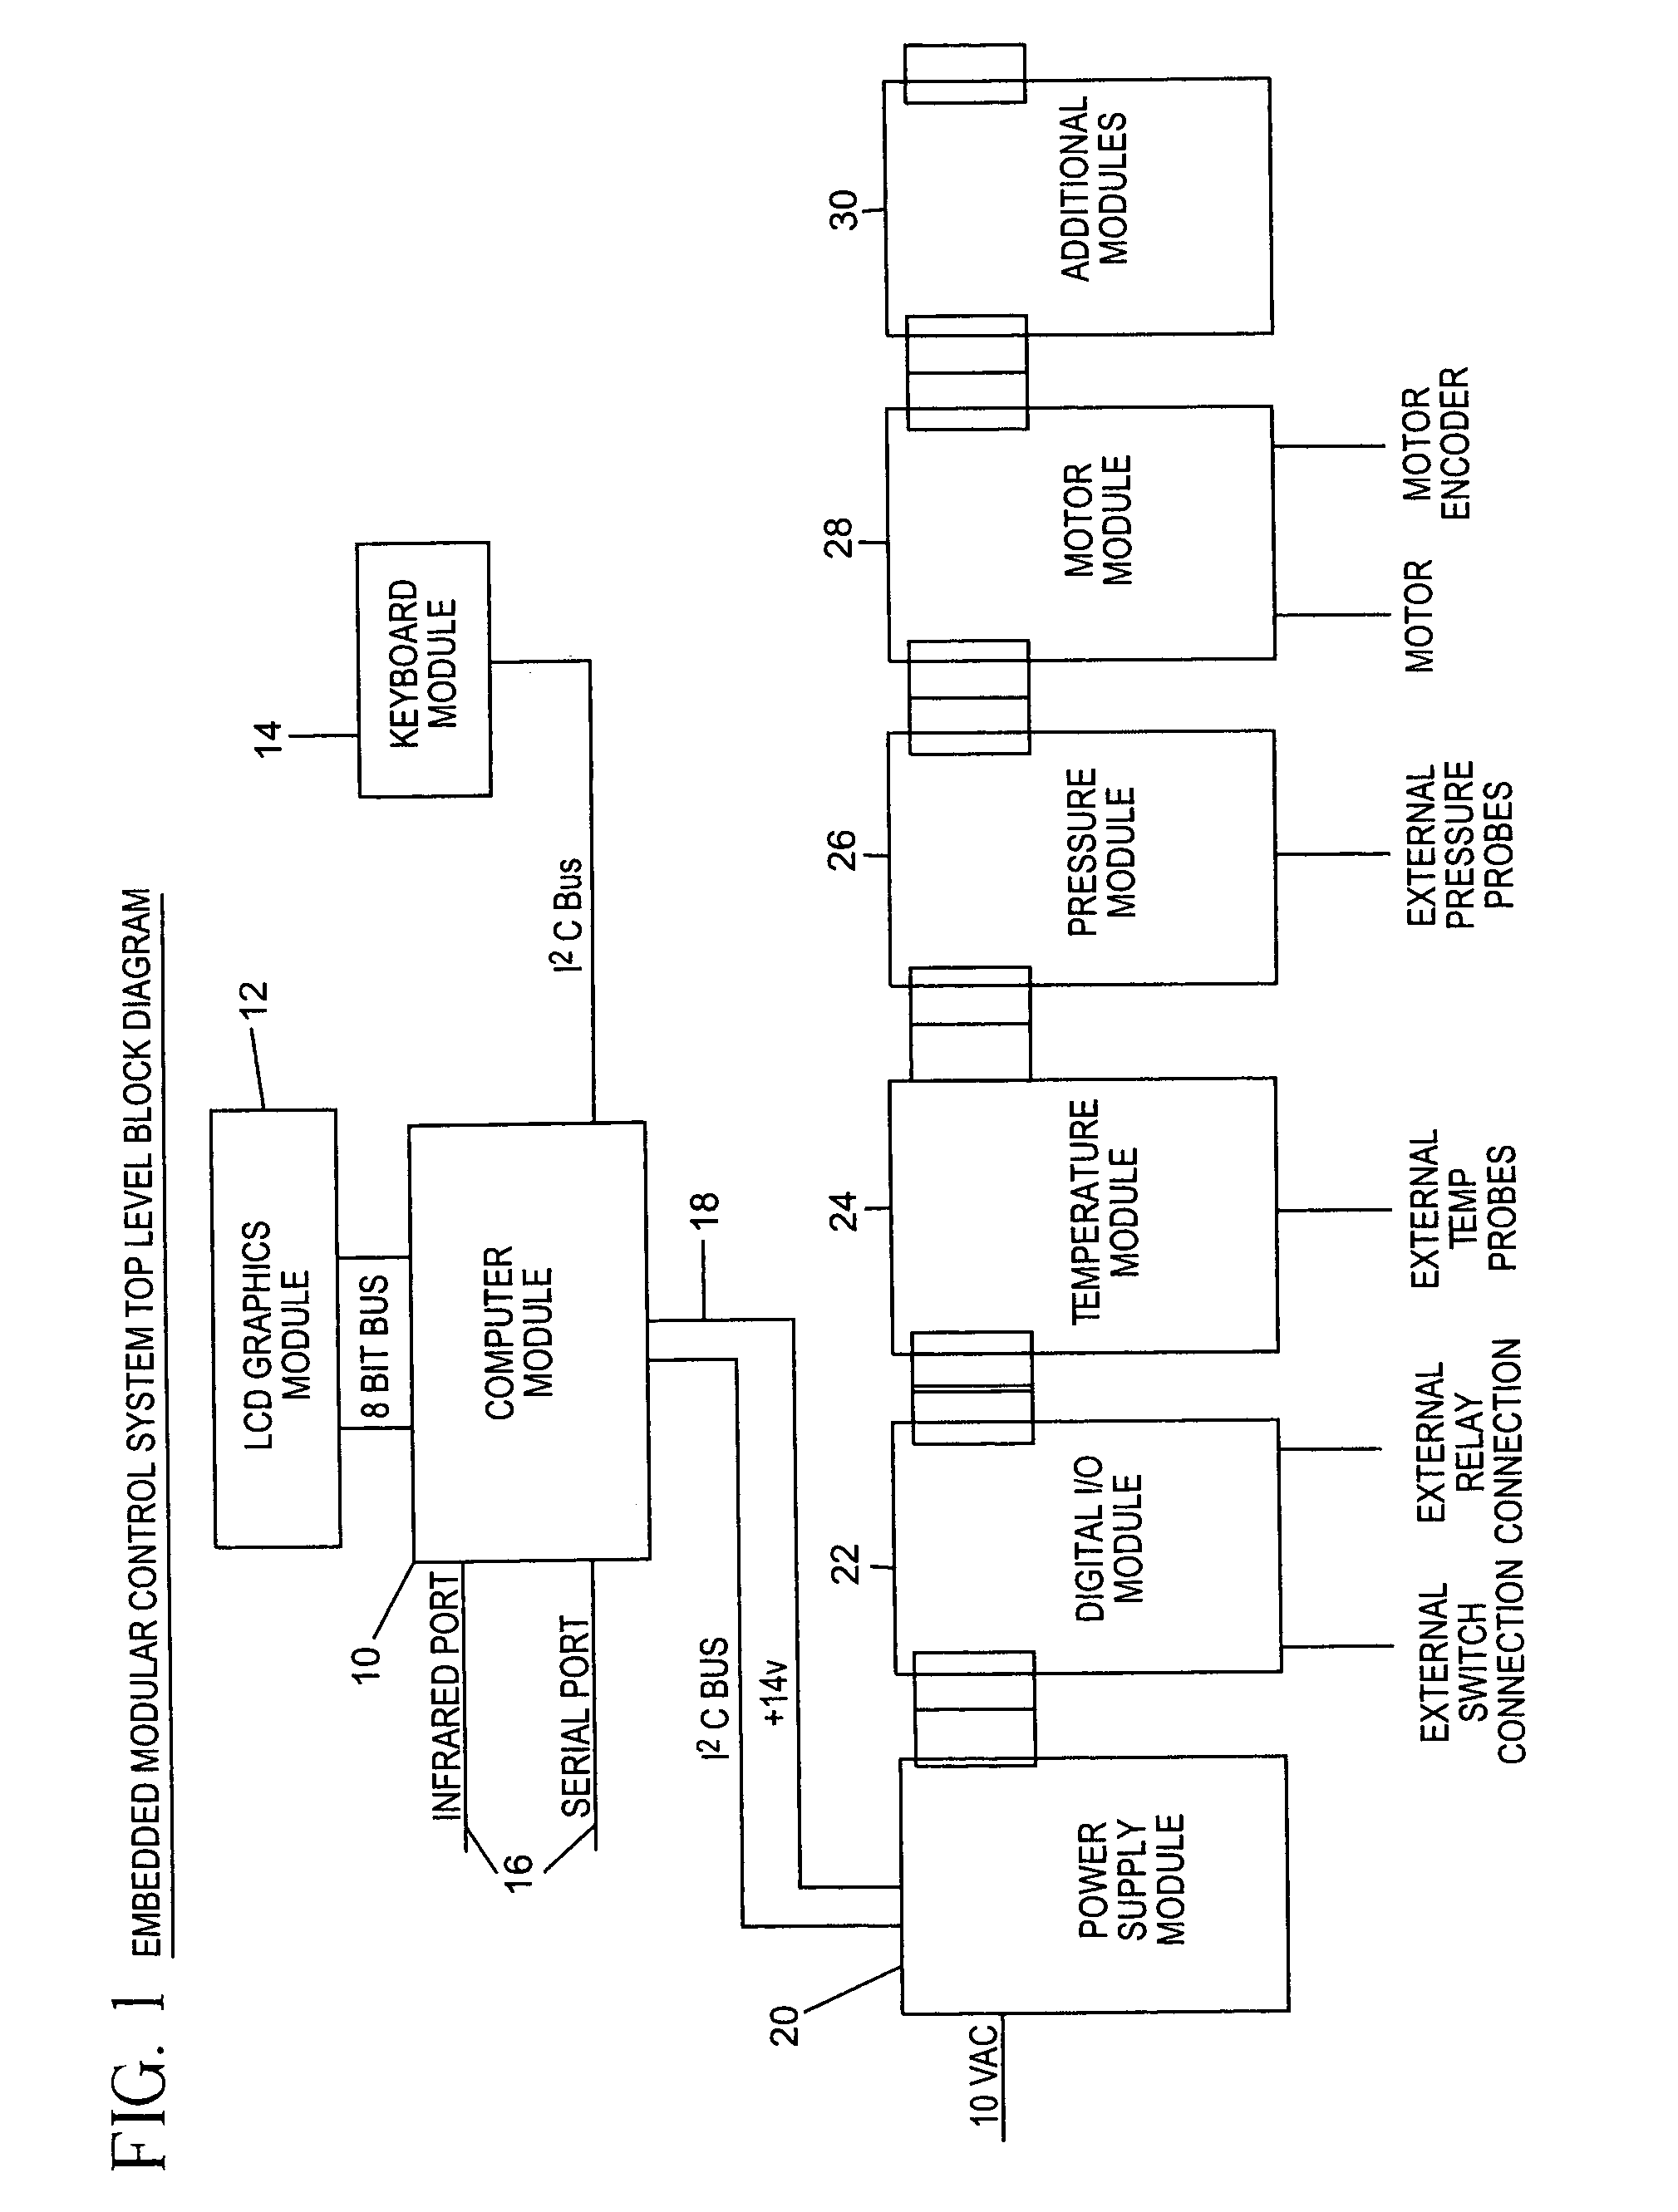 Method and apparatus for modular embedded control system